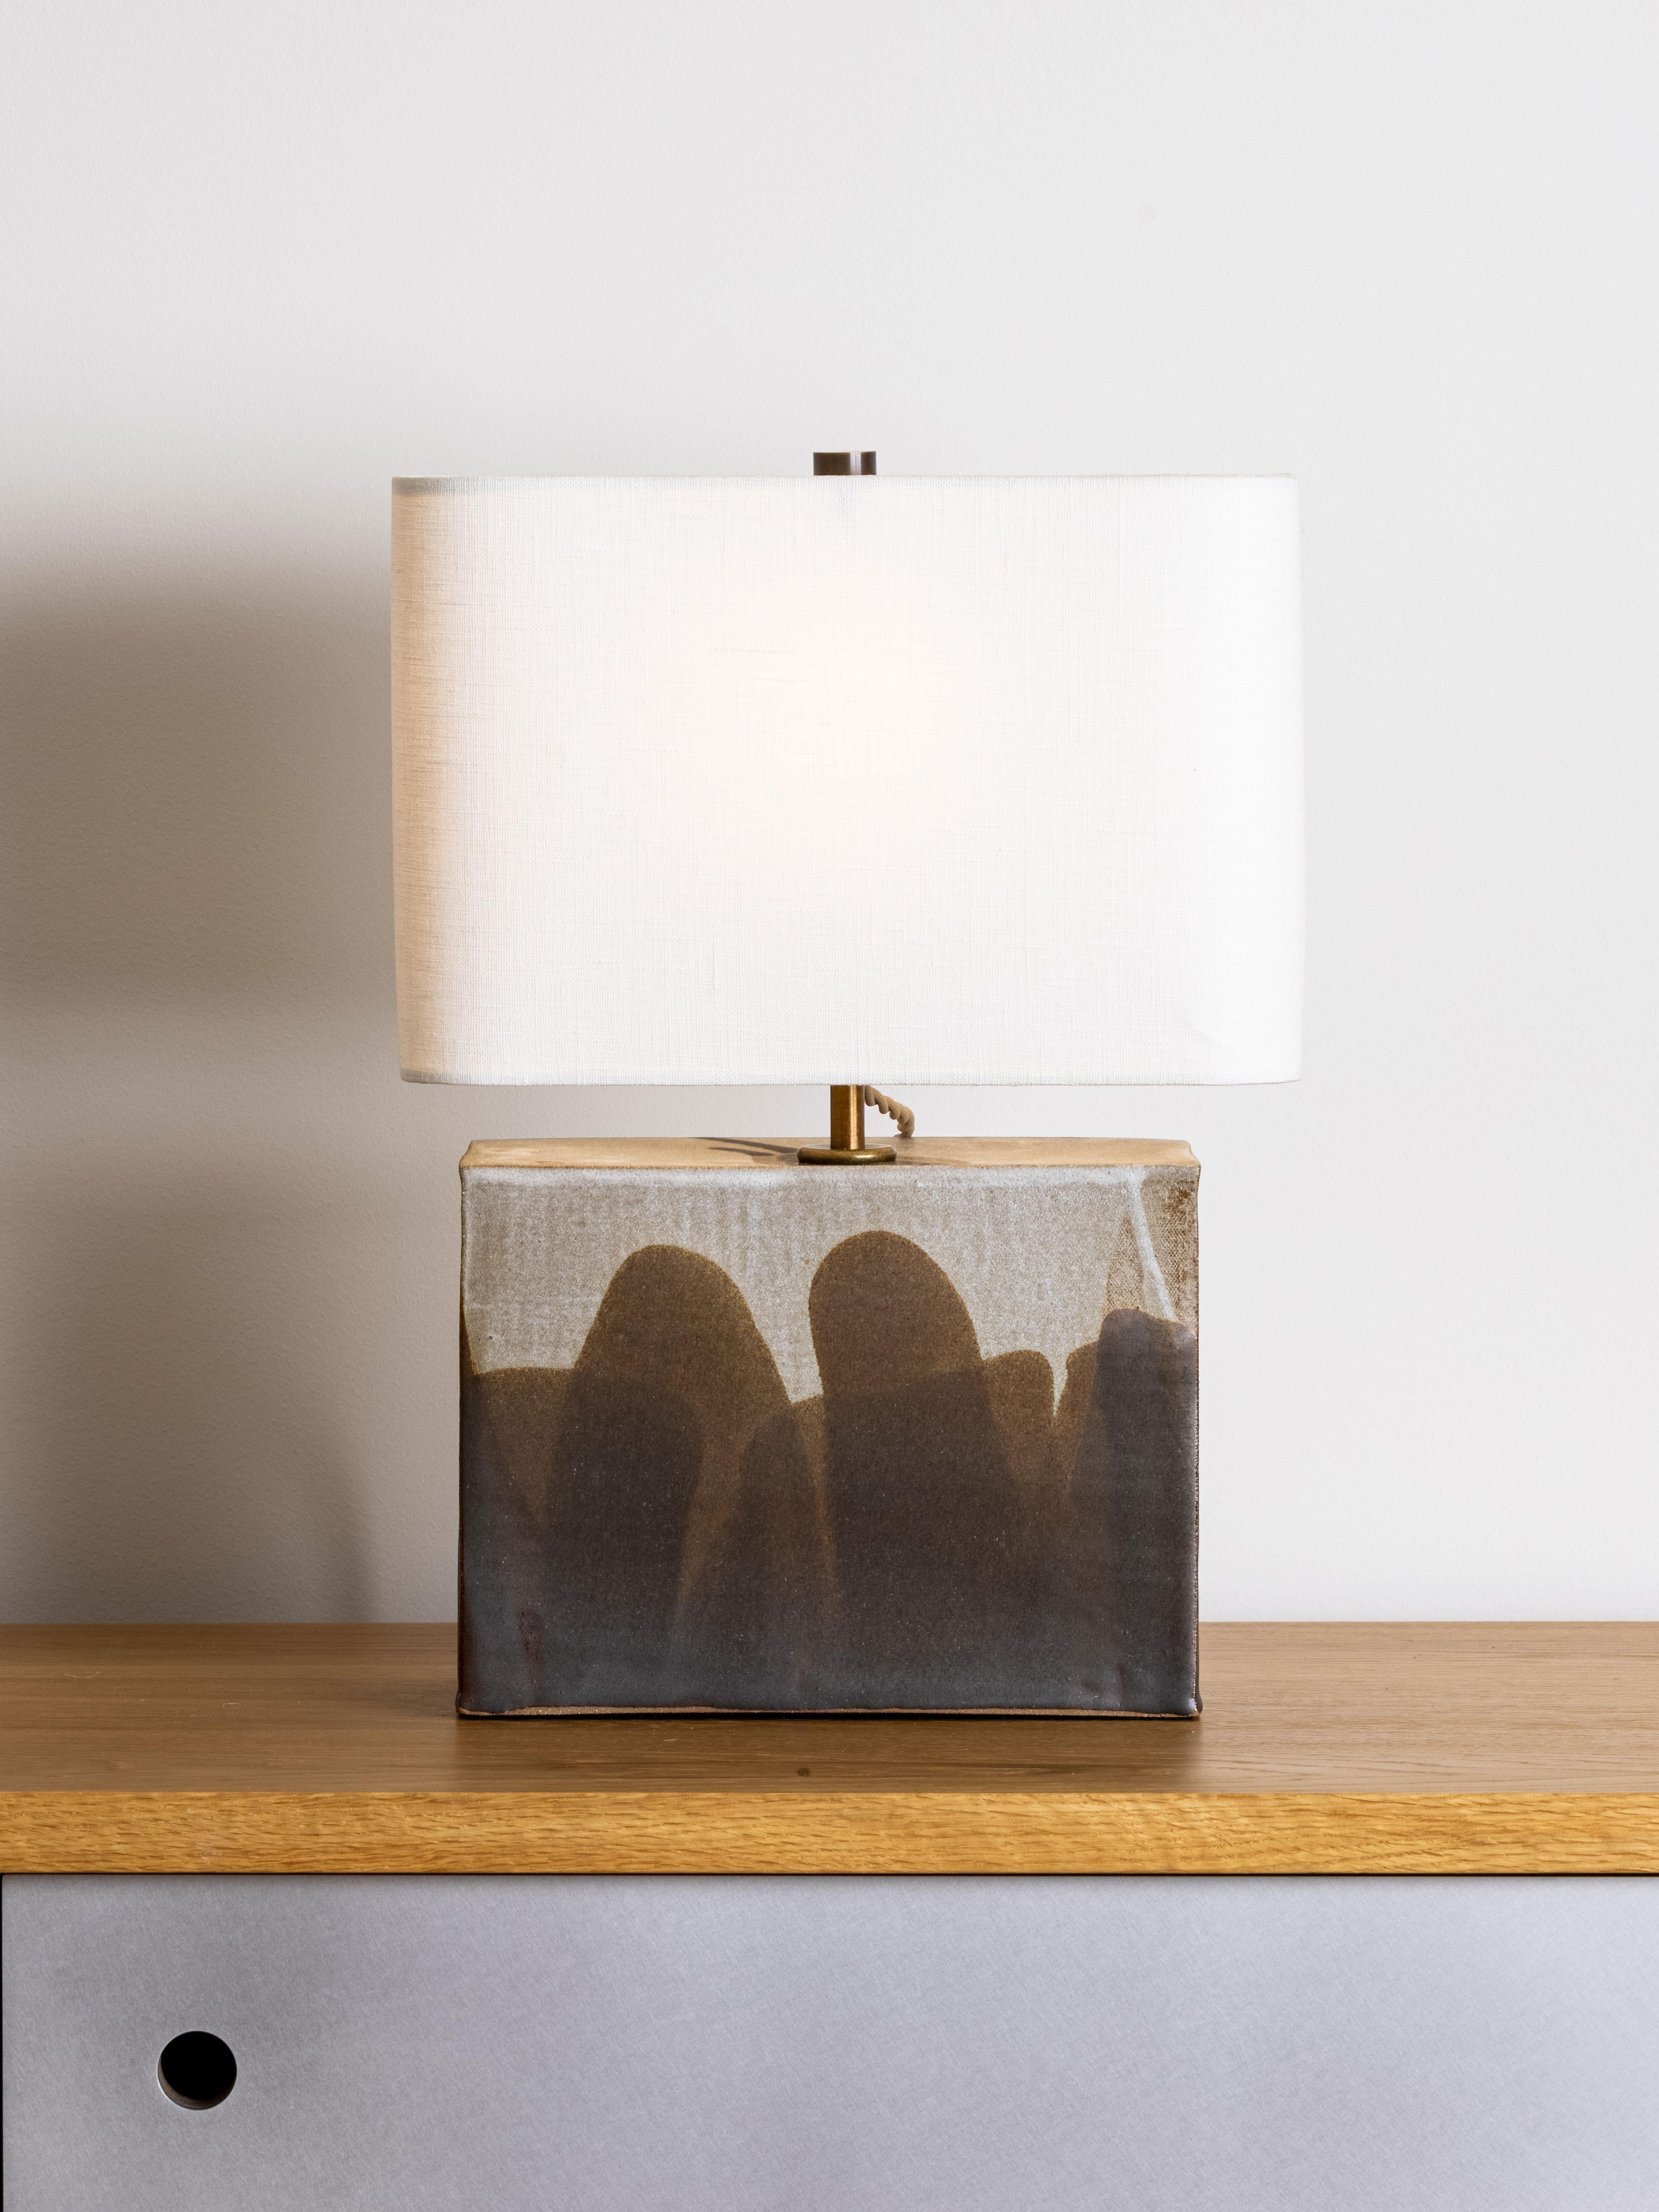 Our stoneware New Preston Lamp is handcrafted using slab-construction techniques.

Finish

- Dipped glaze, pictured in parchment & walnut 
- Antique brass fittings
- Twisted black-cloth cord
- Full-range dimmer socket
- Rectangular